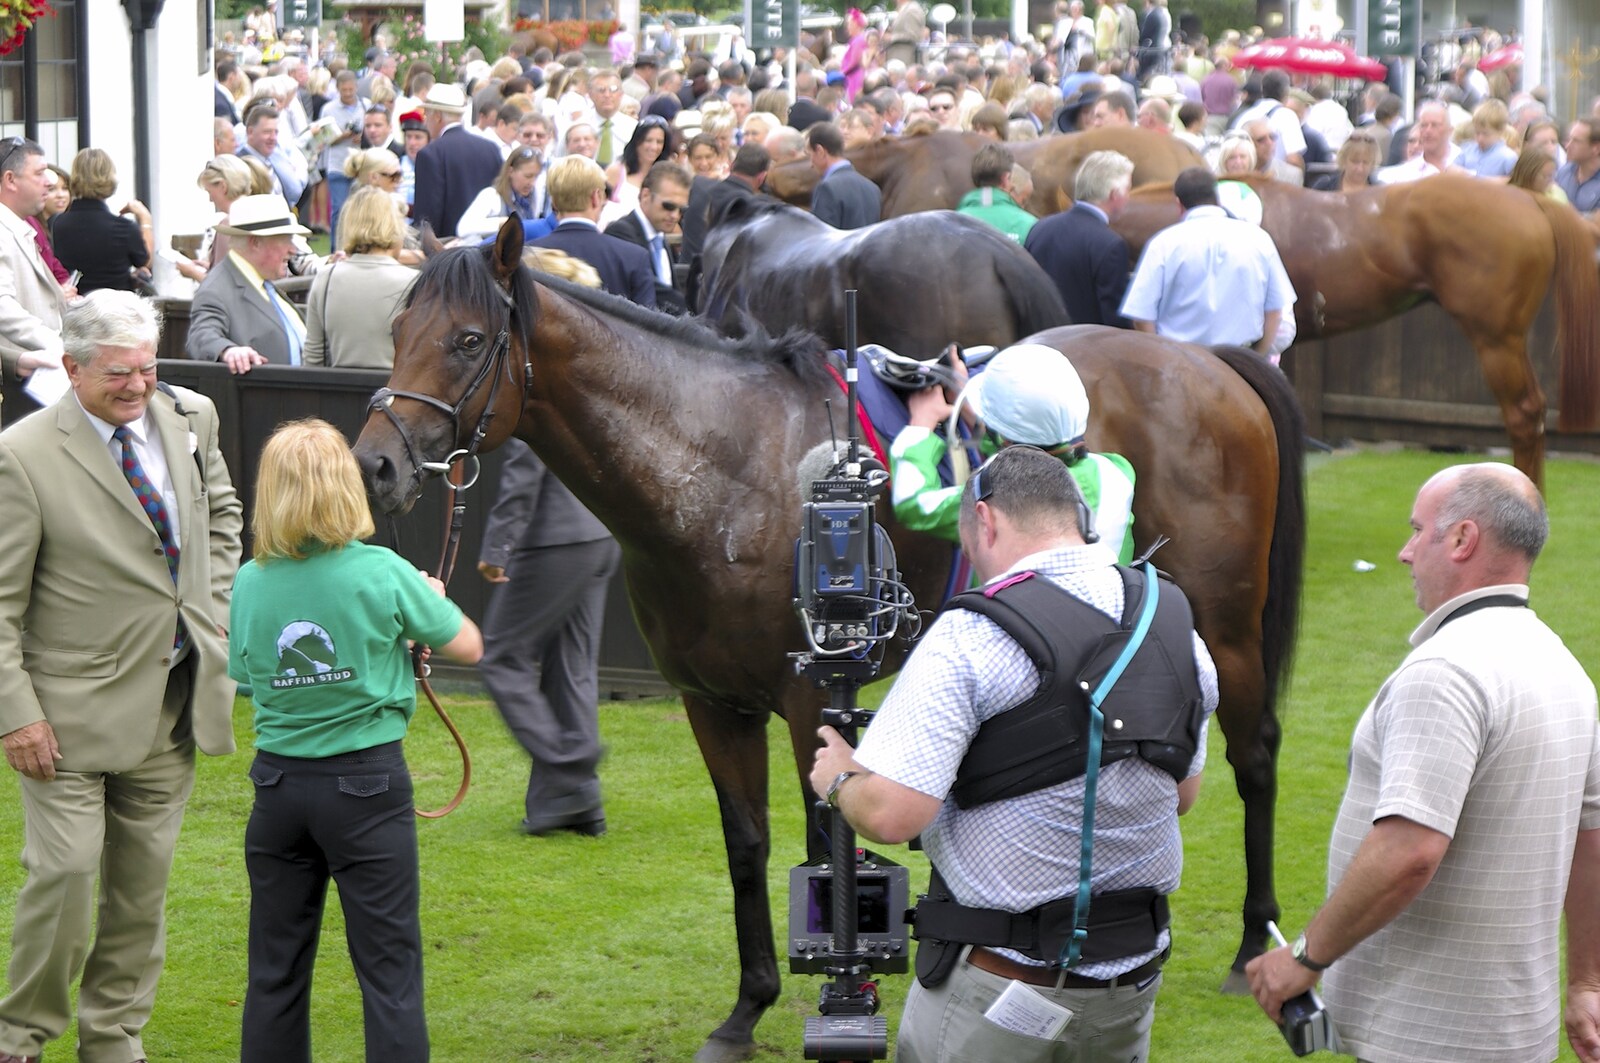 A Day At The Races, Newmarket, Suffolk - 23rd August 2008: A sweaty horse is filmed